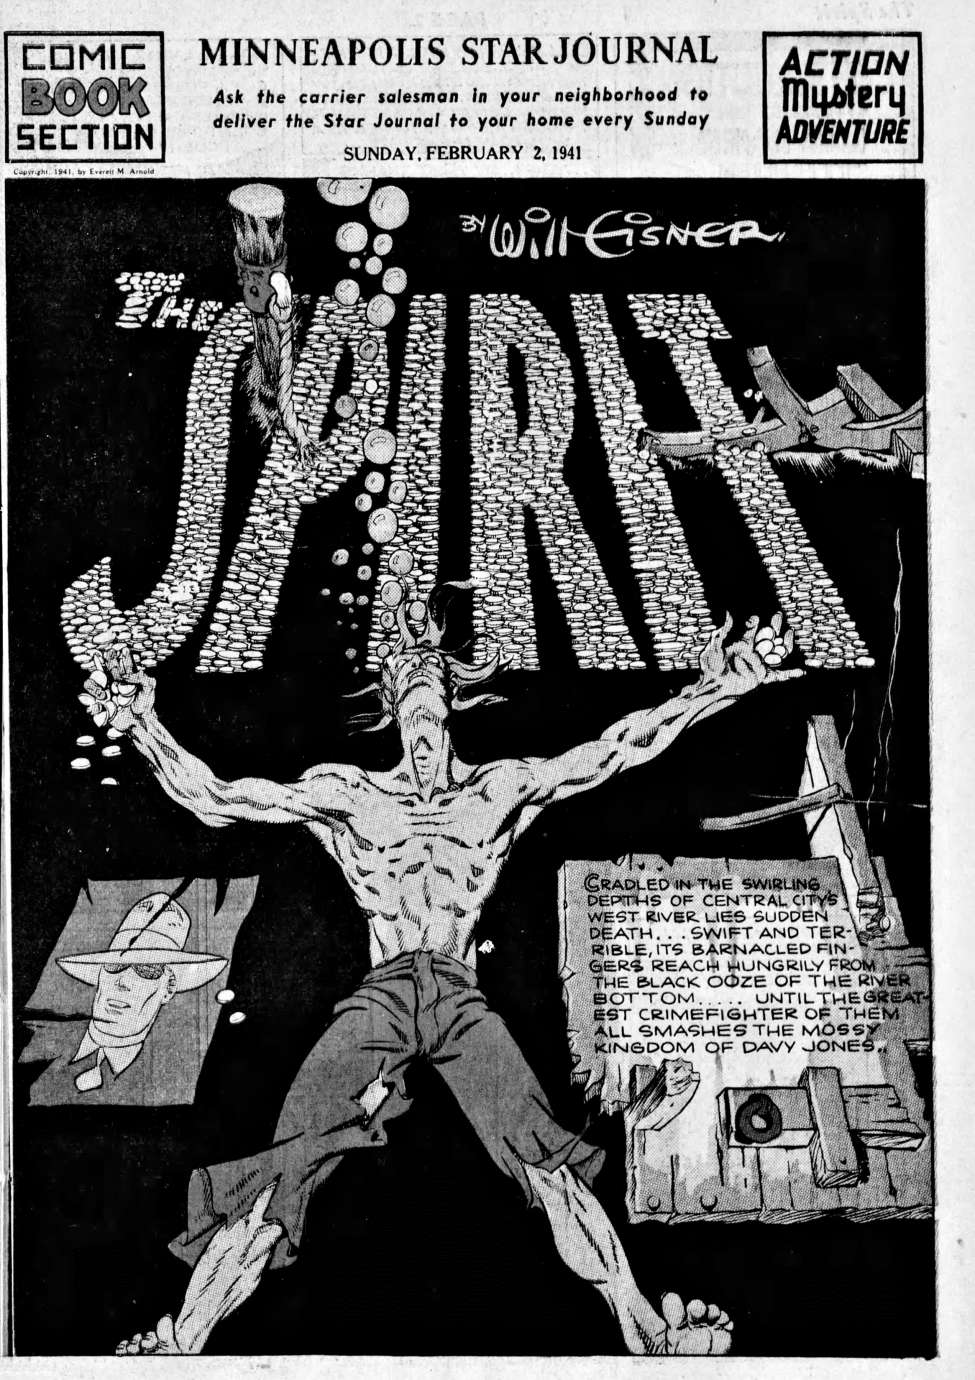 Book Cover For The Spirit (1941-02-02) - Minneapolis Star Journal (b/w)